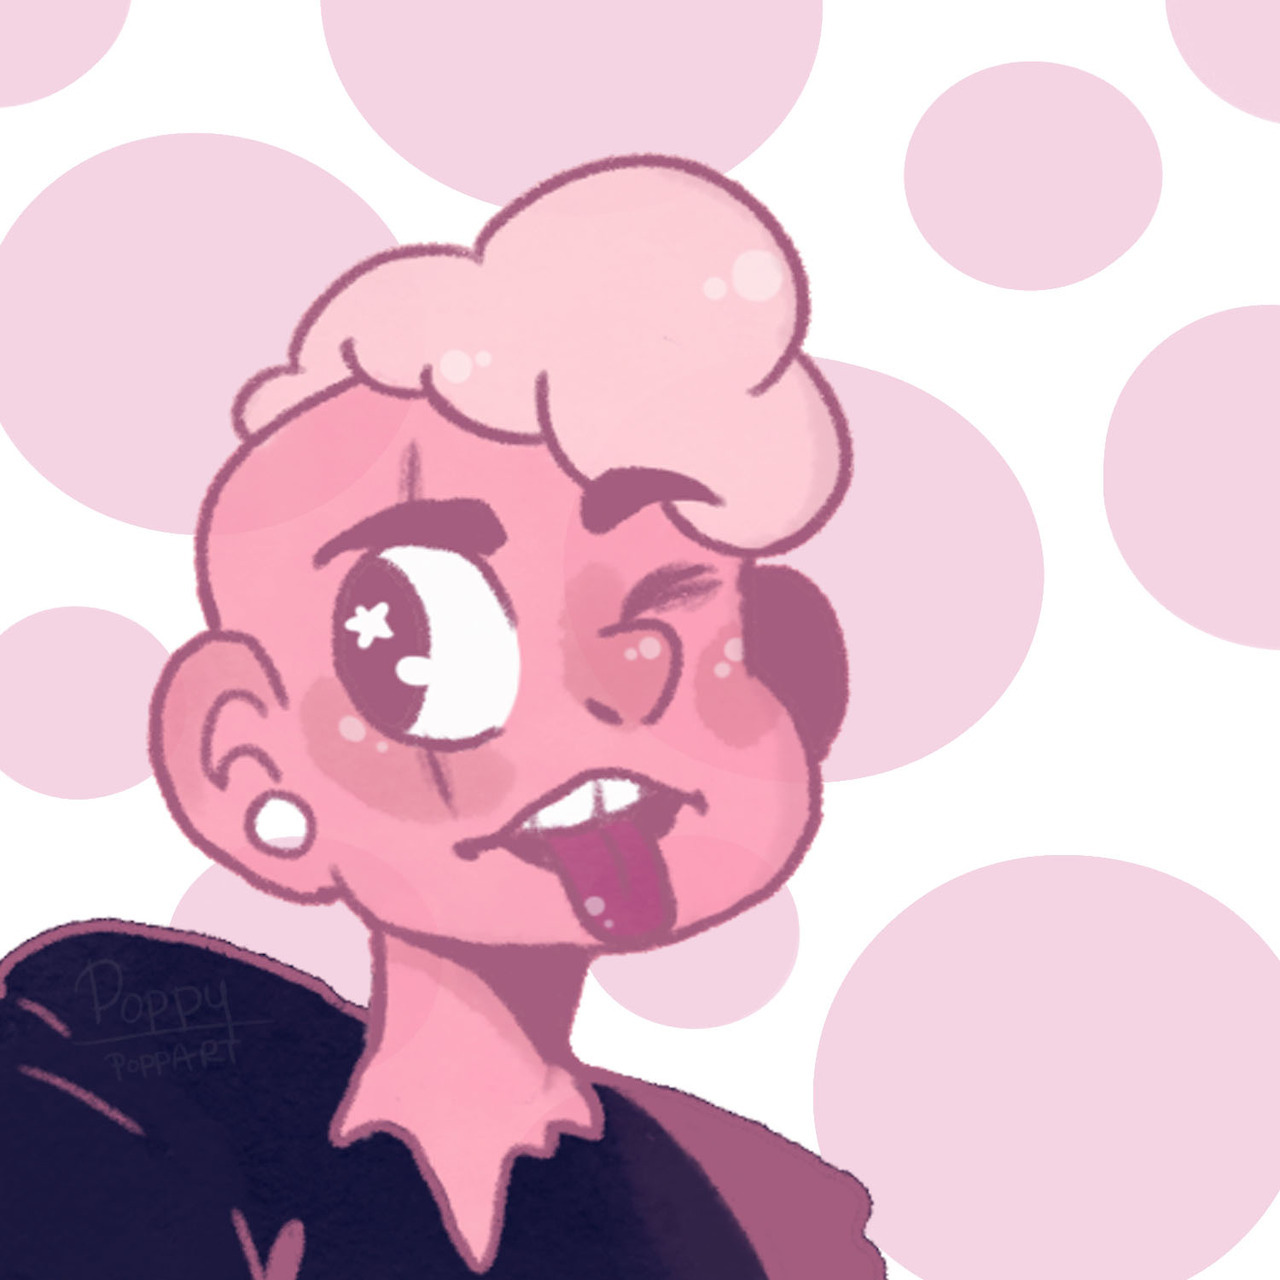 I made pink Lars pride icons! These are free to use, just be sure to credit me! the first one was the original icon i made before adding the flags.